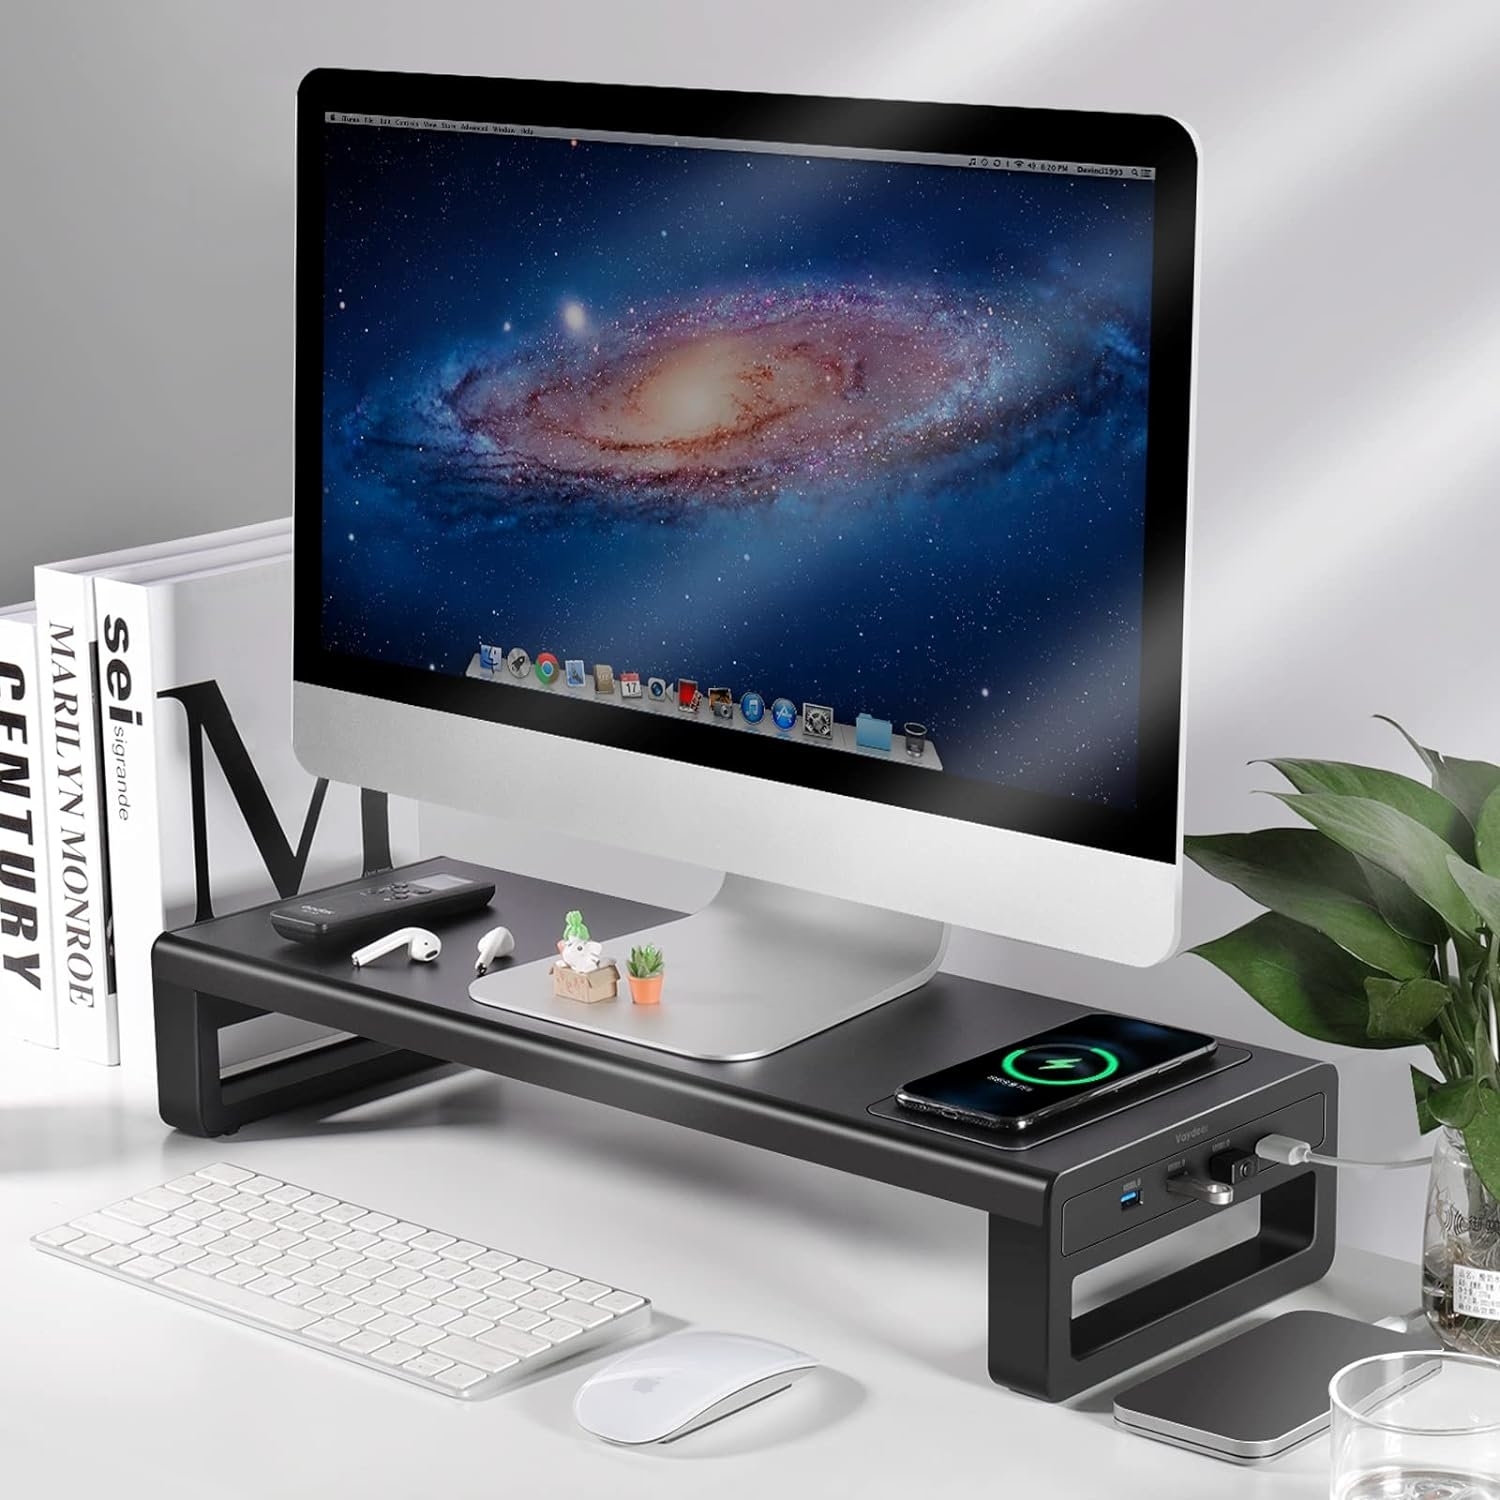 the monitor stand with USB ports on the side and a phone wirelessly charging on top